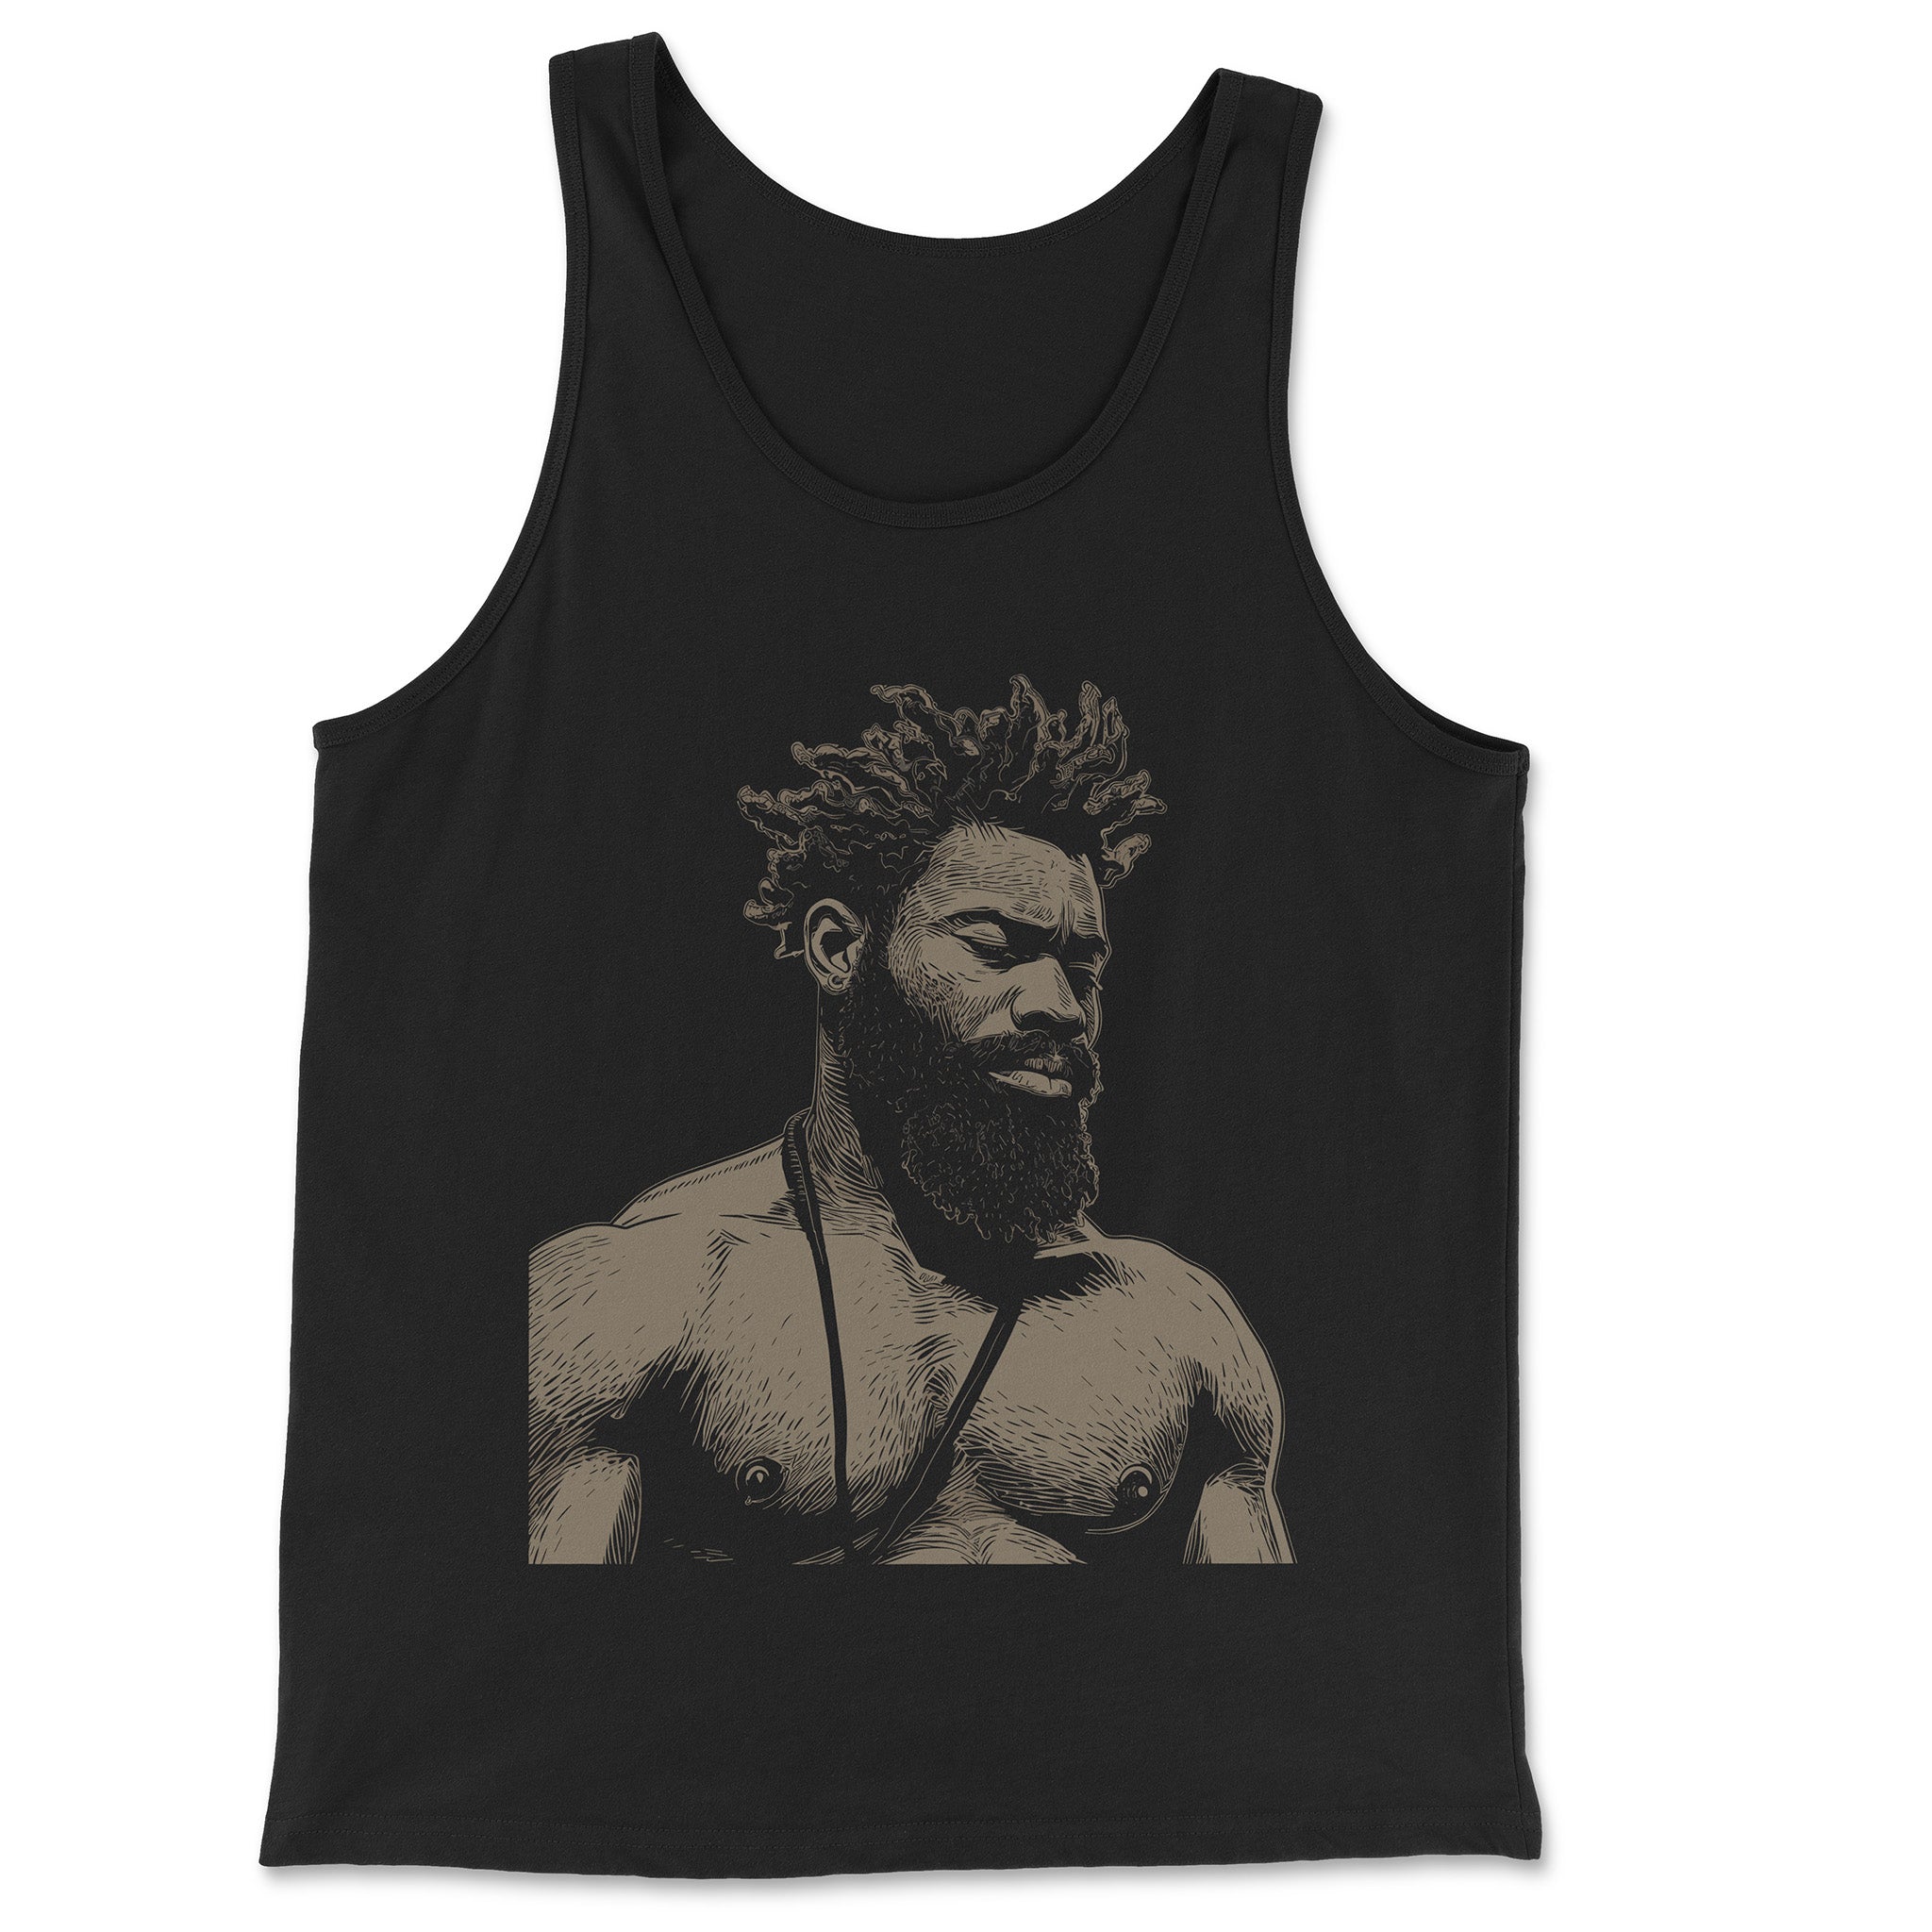 "Deep Thought" Pensive Portrait Tank Top - Hunky Tops